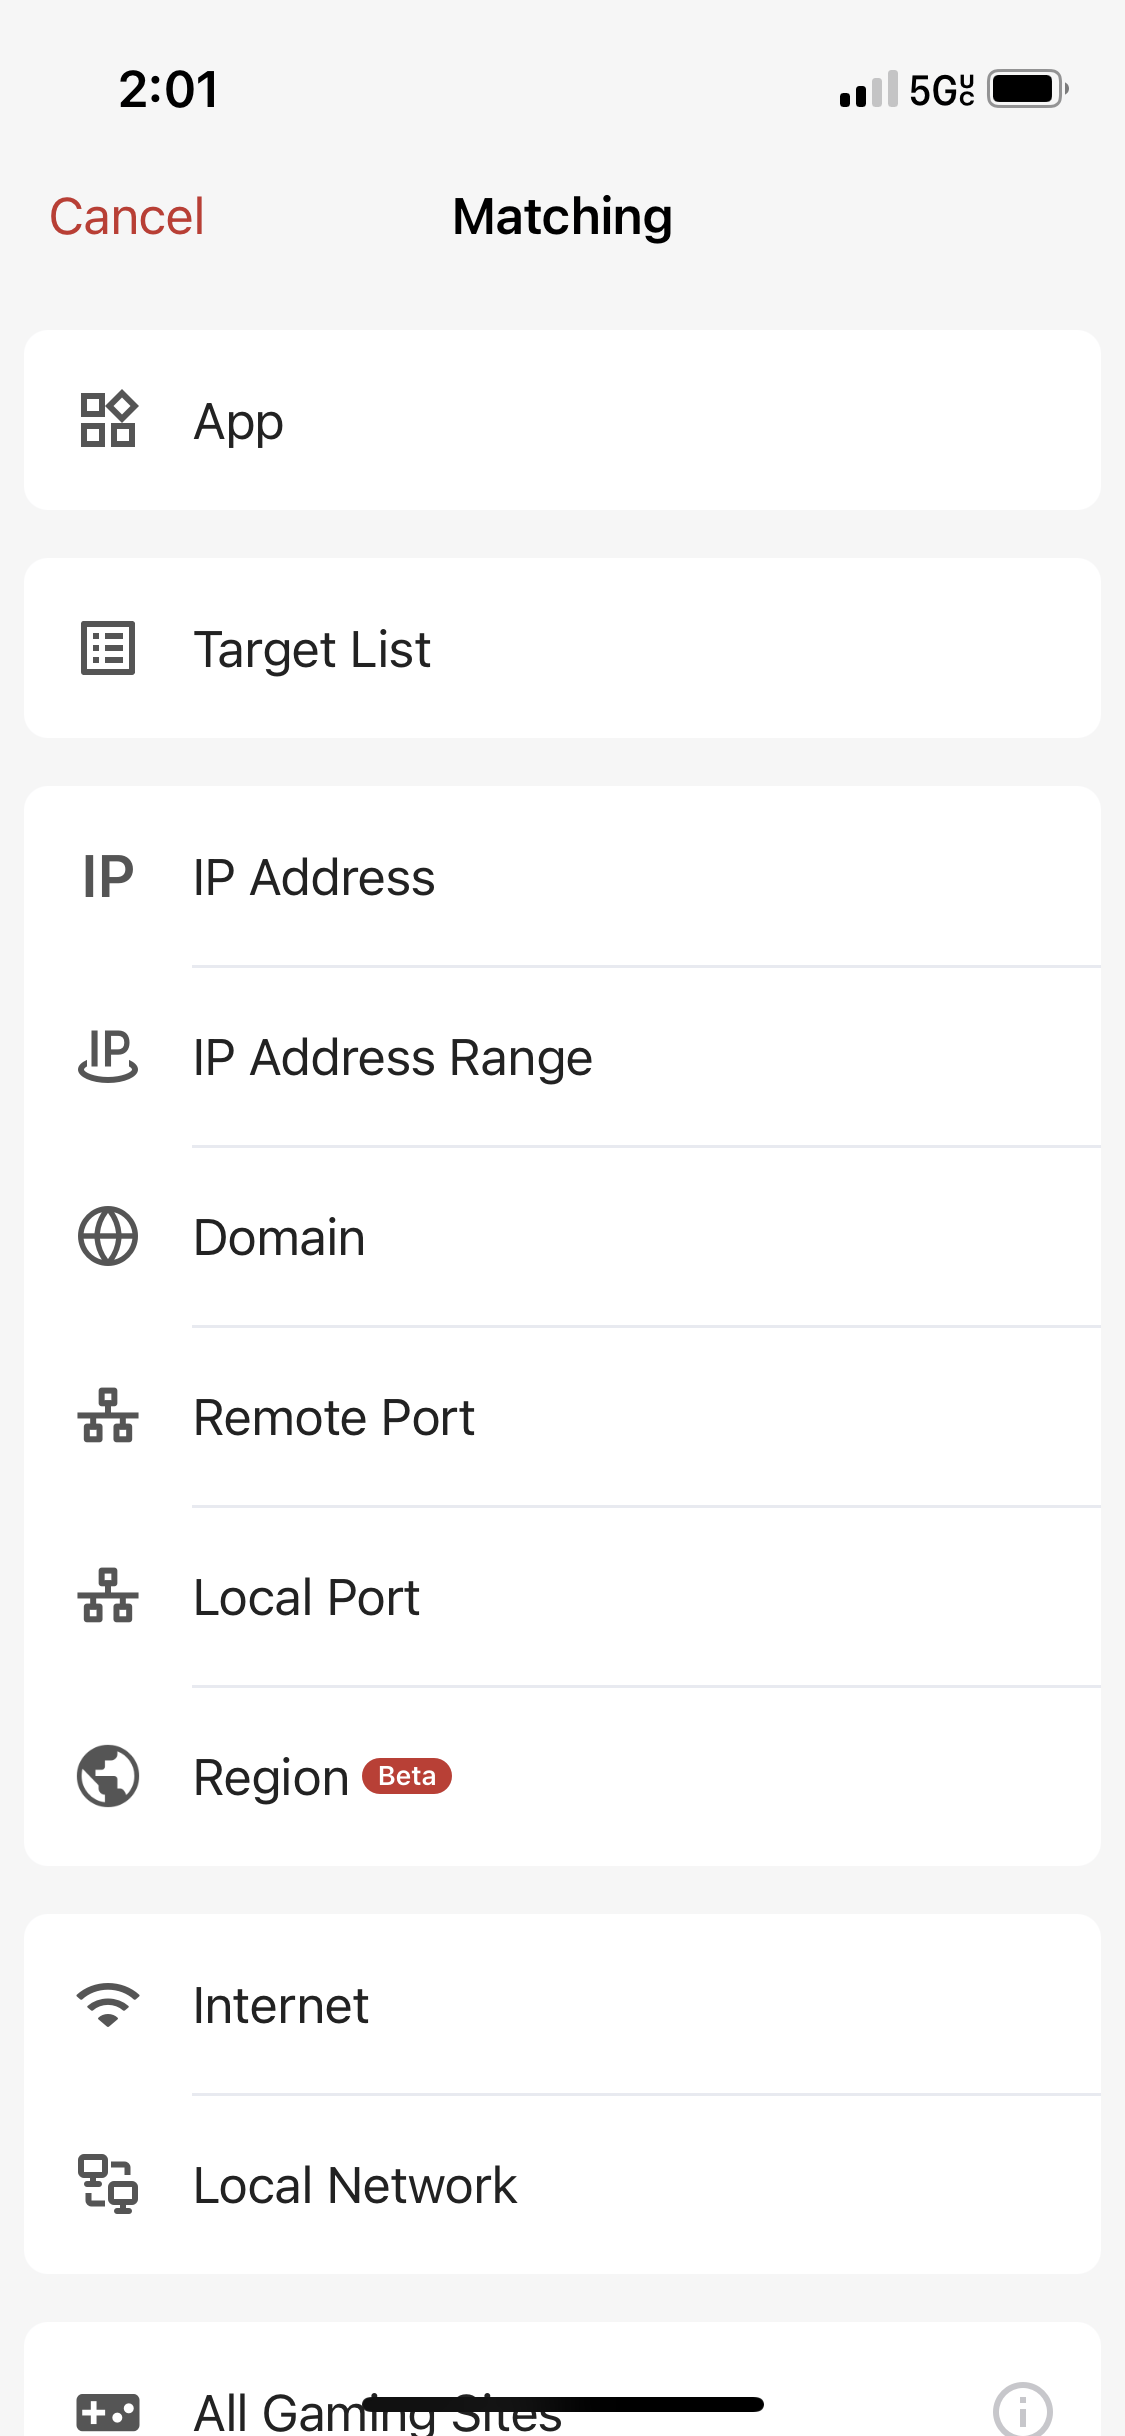 Place the matching component for a new rule to block a domain, IP, IP-range via the rules button